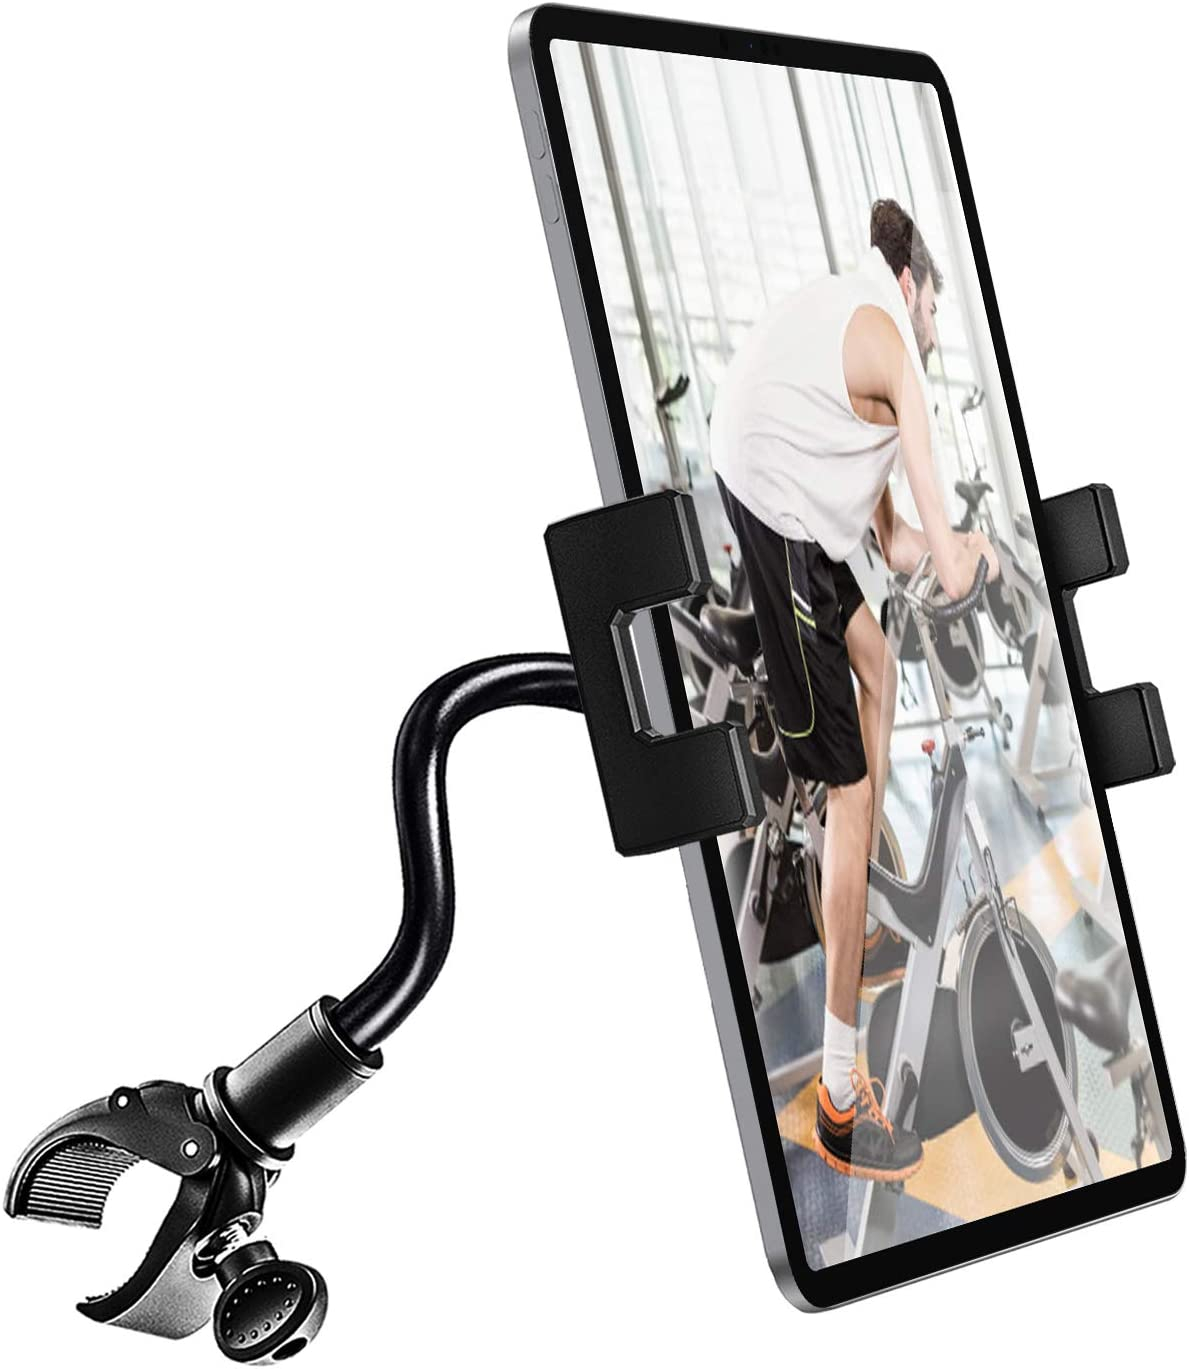 Spinning Bike Tablet Holder Mount Lamicall Treadmill Tablet Stand Indoor Exercise Bicycle Tablet Clamp for iPad Pro 11 / Mini/Air Samsung Tabs and More 4.7-12.9 Tablets and Cellphones 